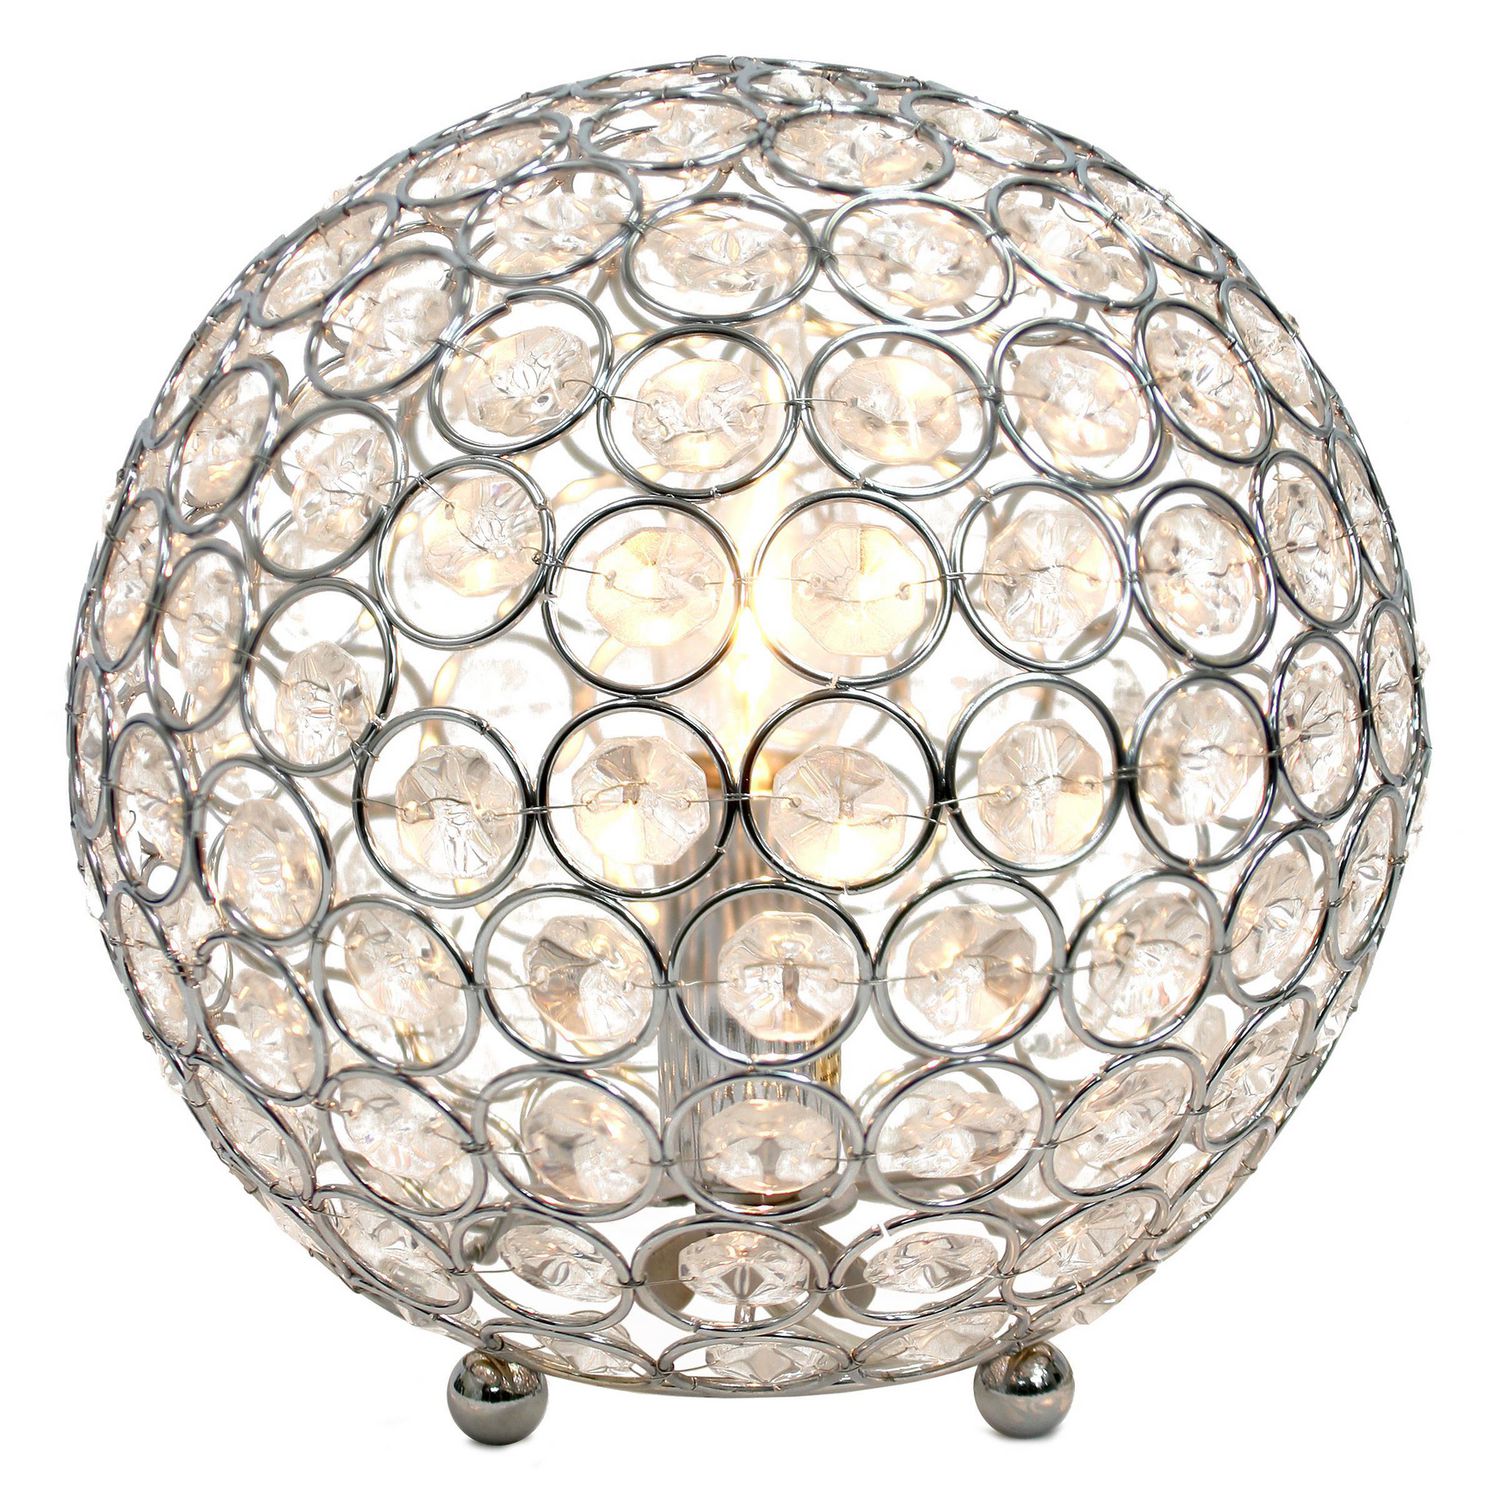 10 in Crystal Ball Sequin Table Lamp in Bronze ID 3914476 